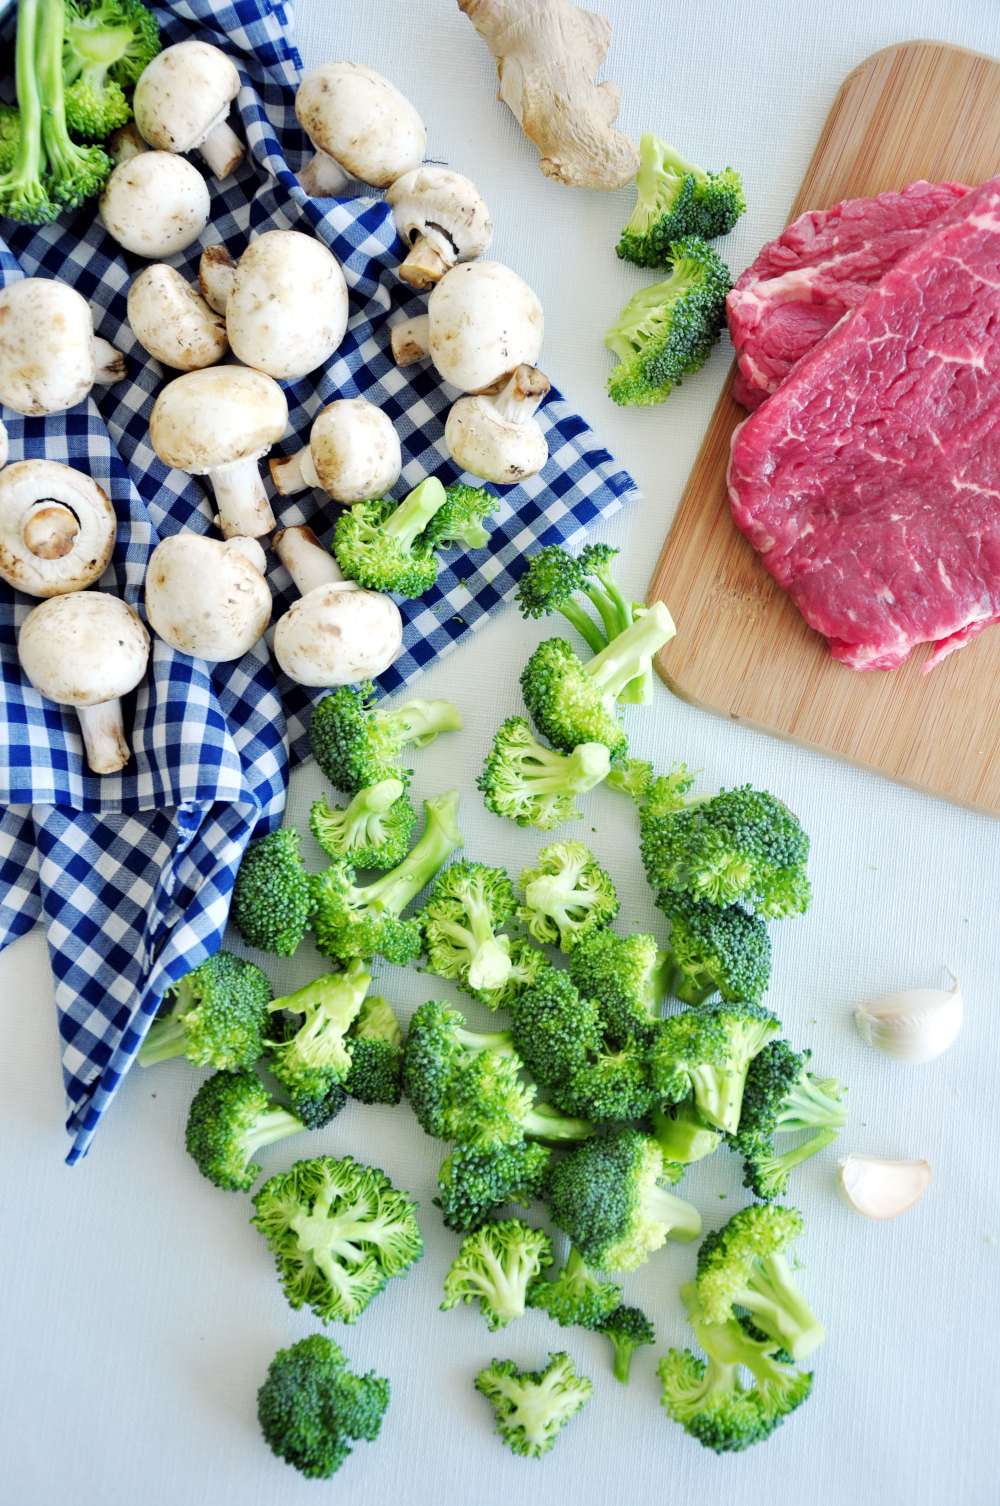 Red Wine Beef Broccoli with Mushrooms ingredients